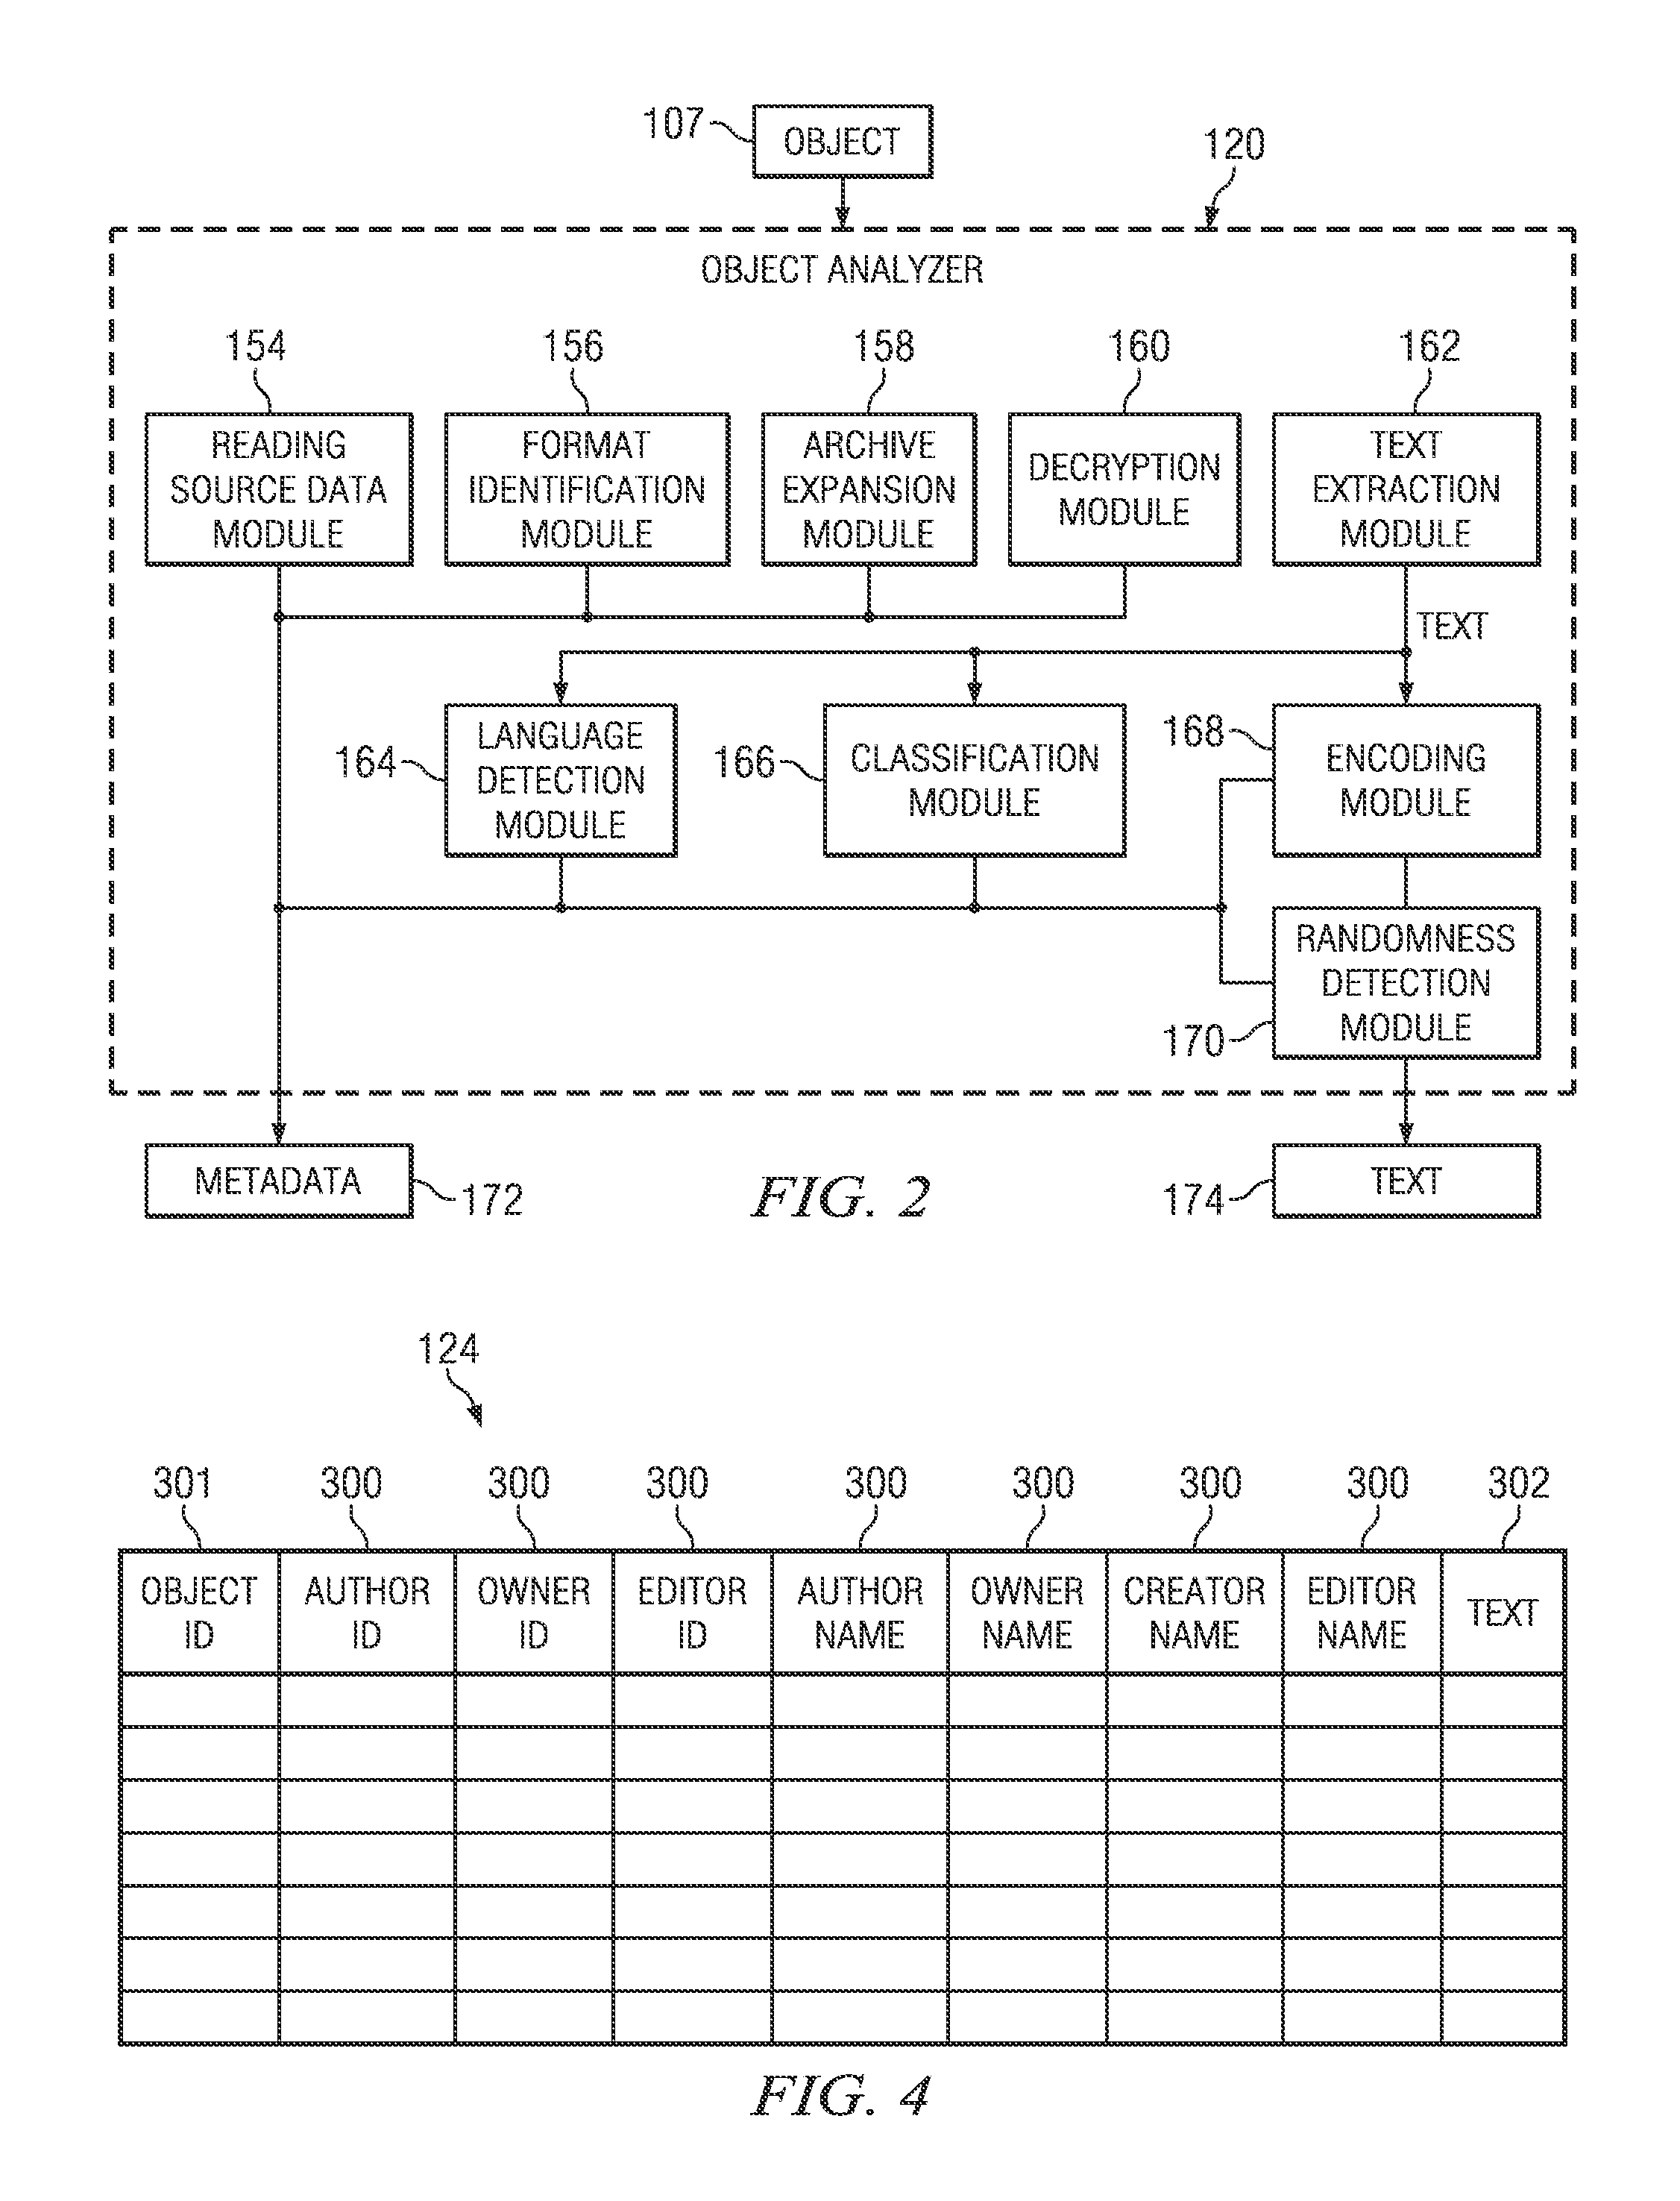 System and Method of Search Indexes Using Key-Value Attributes to Searchable Metadata